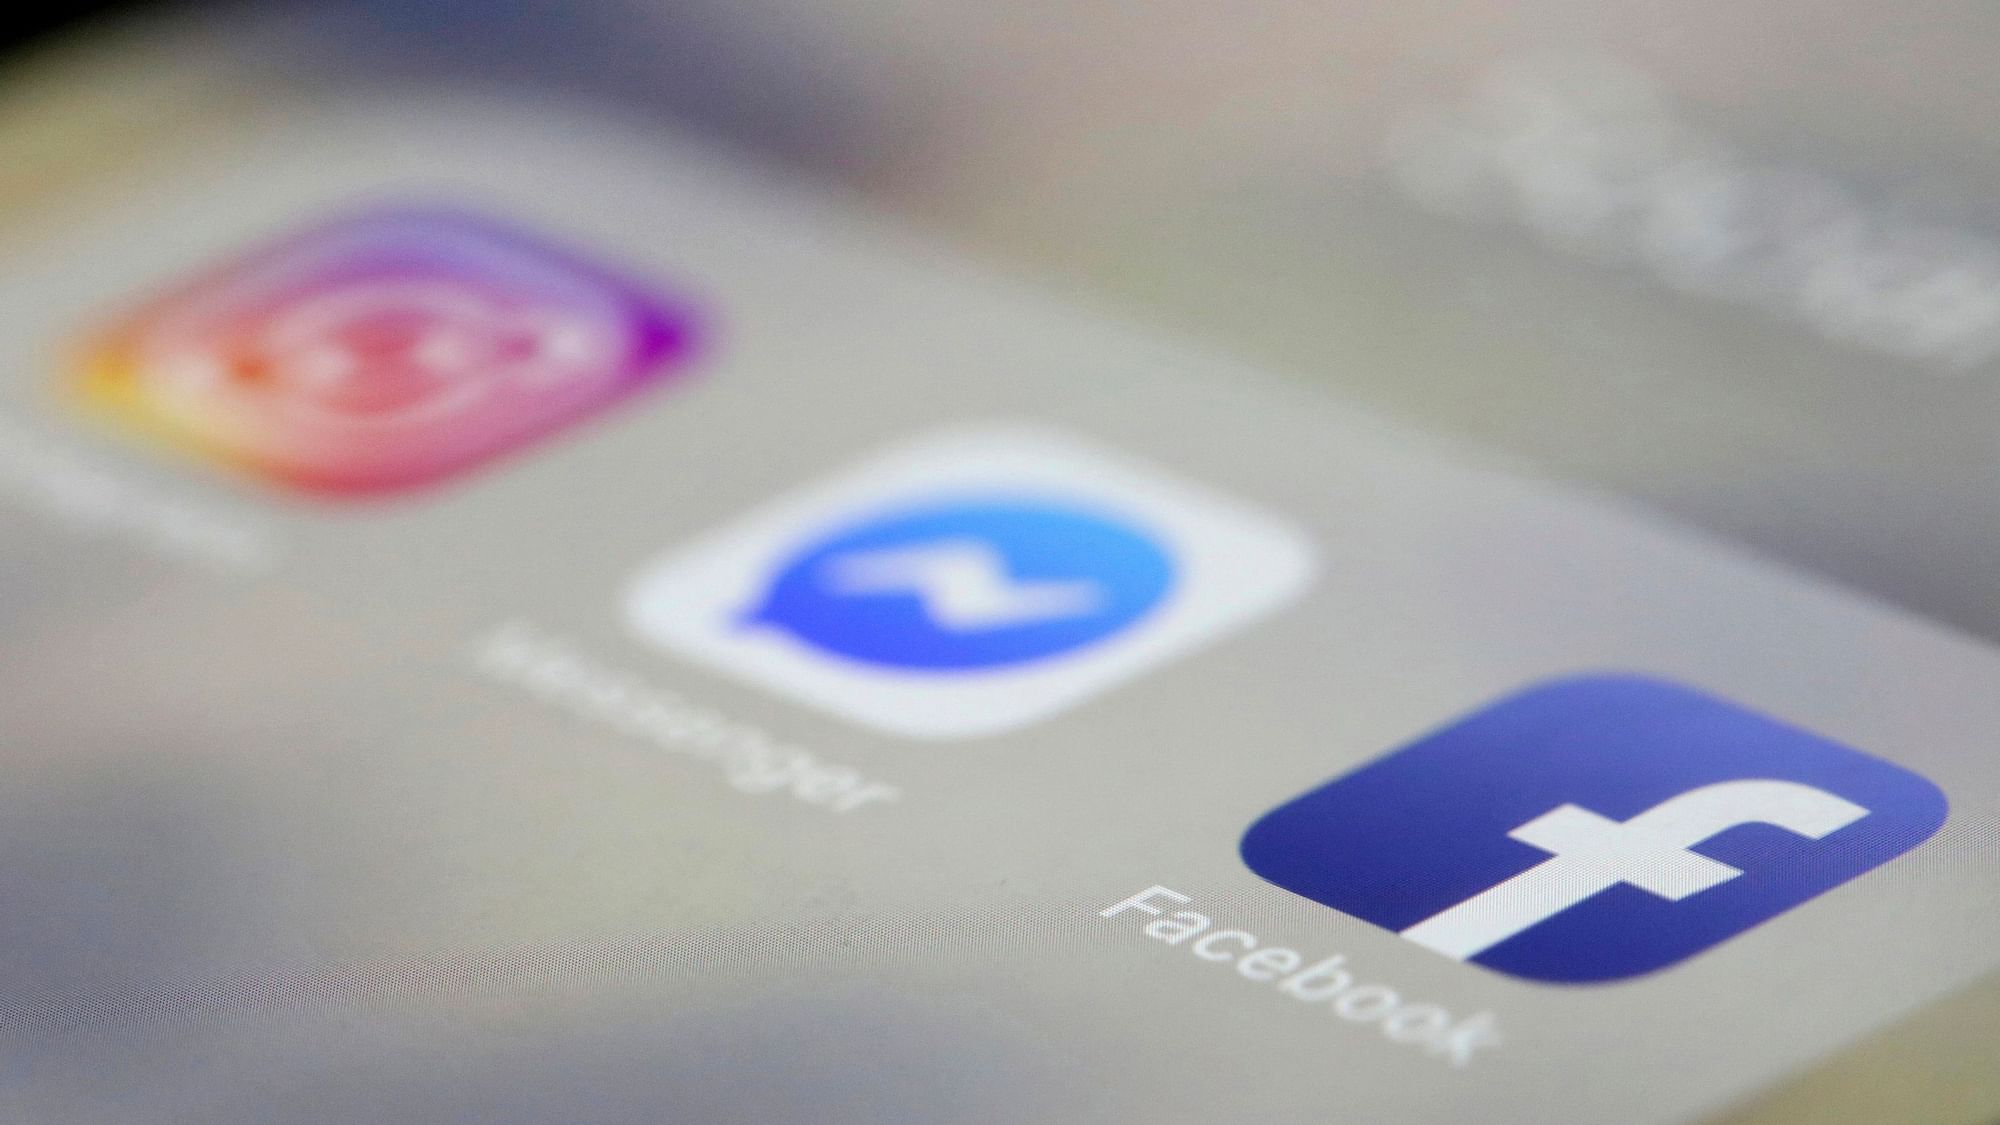 Facebook is merging its messaging and photo sharing services.